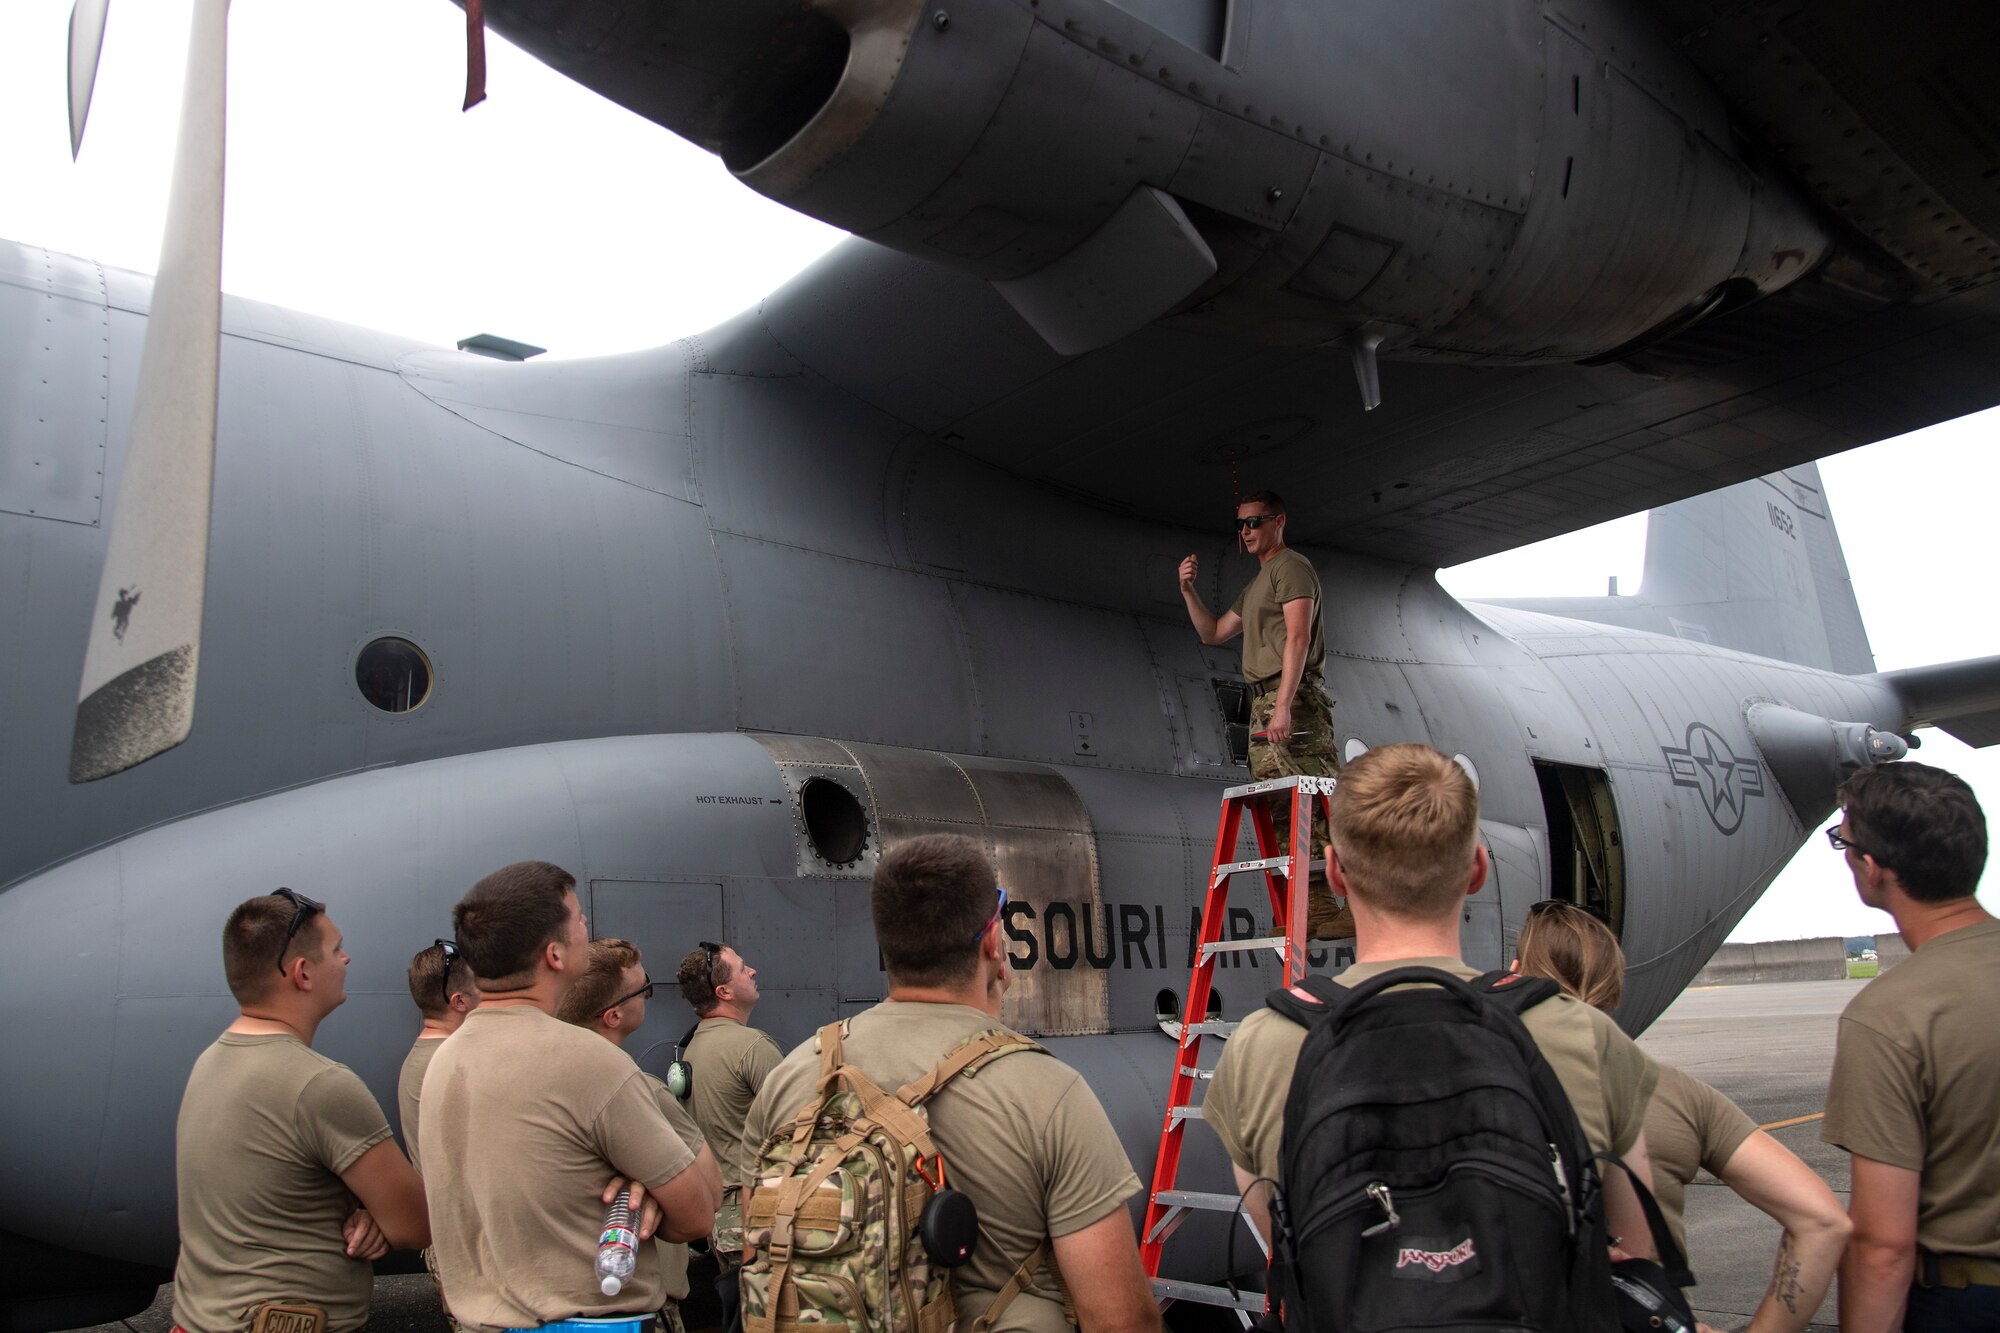 Air National Guardsmen gather by a C-130 Hercules assigned to the Missouri Air National Guard, to train on methods of checking aircraft fuel quantities at Yokota Air Base, Japan, July 15, 2023, in support of Mobility Guardian 2023. Air National Guardsmen from Missouri, Montana and Connecticut worked together as one unit to during to ensure C-130s could perform rapid global mobility in support of MG23. A multilateral endeavor, MG23 features seven participating countries – Australia, Canada, France, Japan, New Zealand, United Kingdom, and the United States – operating approximately 70 mobility aircraft across multiple locations spanning a 3,000-mile exercise area from July 5-21. Our Allies and partners are one of our greatest strengths and a key strategic advantage. MG23 is an opportunity to deepen our connections with regional Allies and partners using bold initiatives. (U.S. Air Force photo by Tech. Sgt. Christopher Hubenthal)